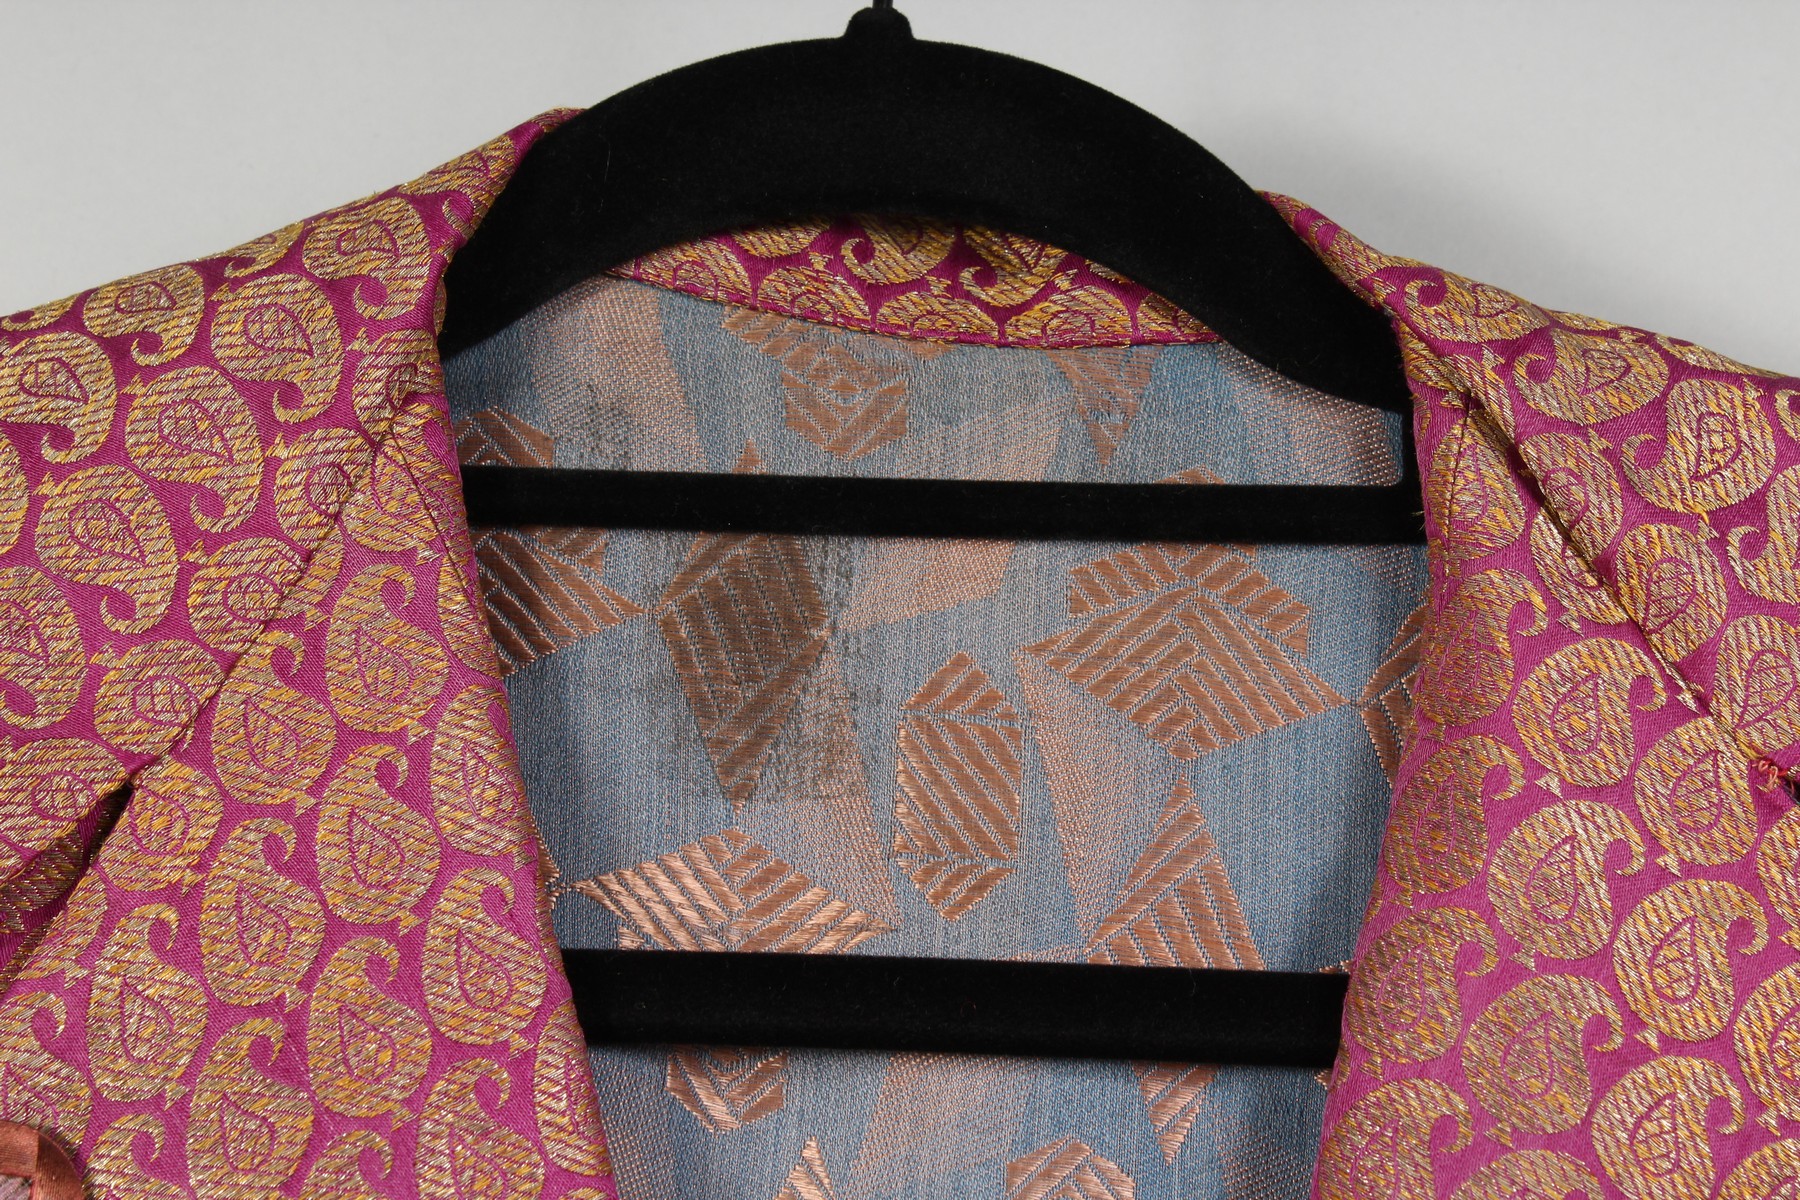 A GOOD INDIAN HOUSECOAT, purple ground with allover gilt thread Boteh design. 3ft 4ins. - Image 7 of 11